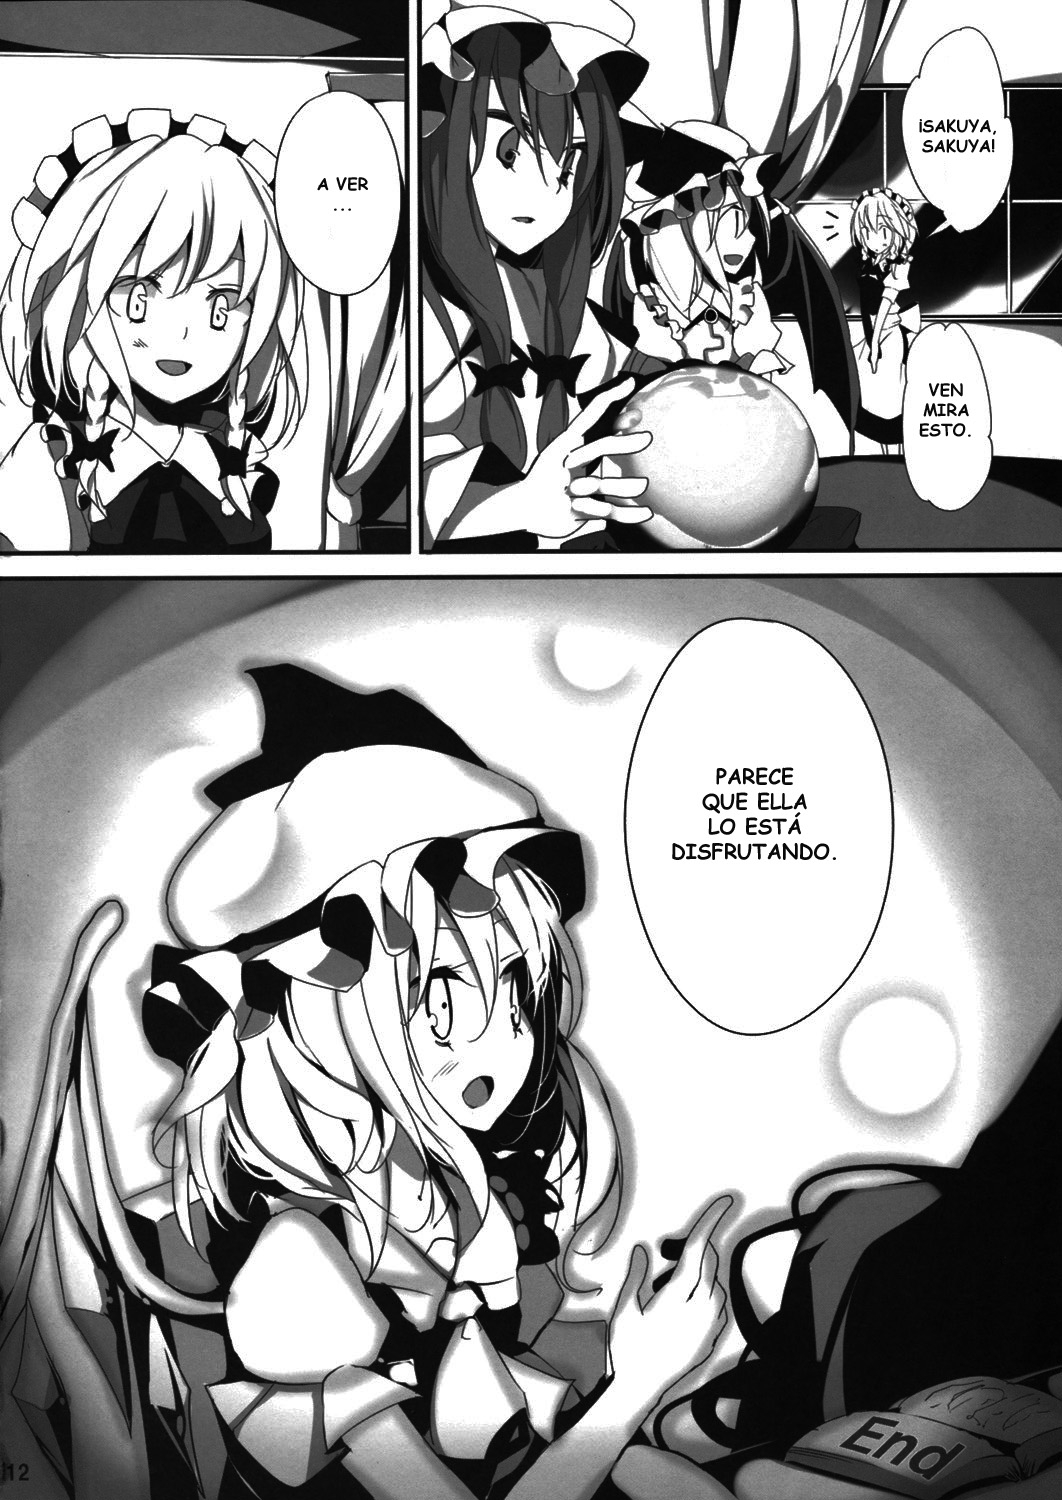 (C76) [Usotsukiya, Oppore-Coppore (BeLL, Oouso)] Flandre Student (Touhou Project) [Spanish] 11